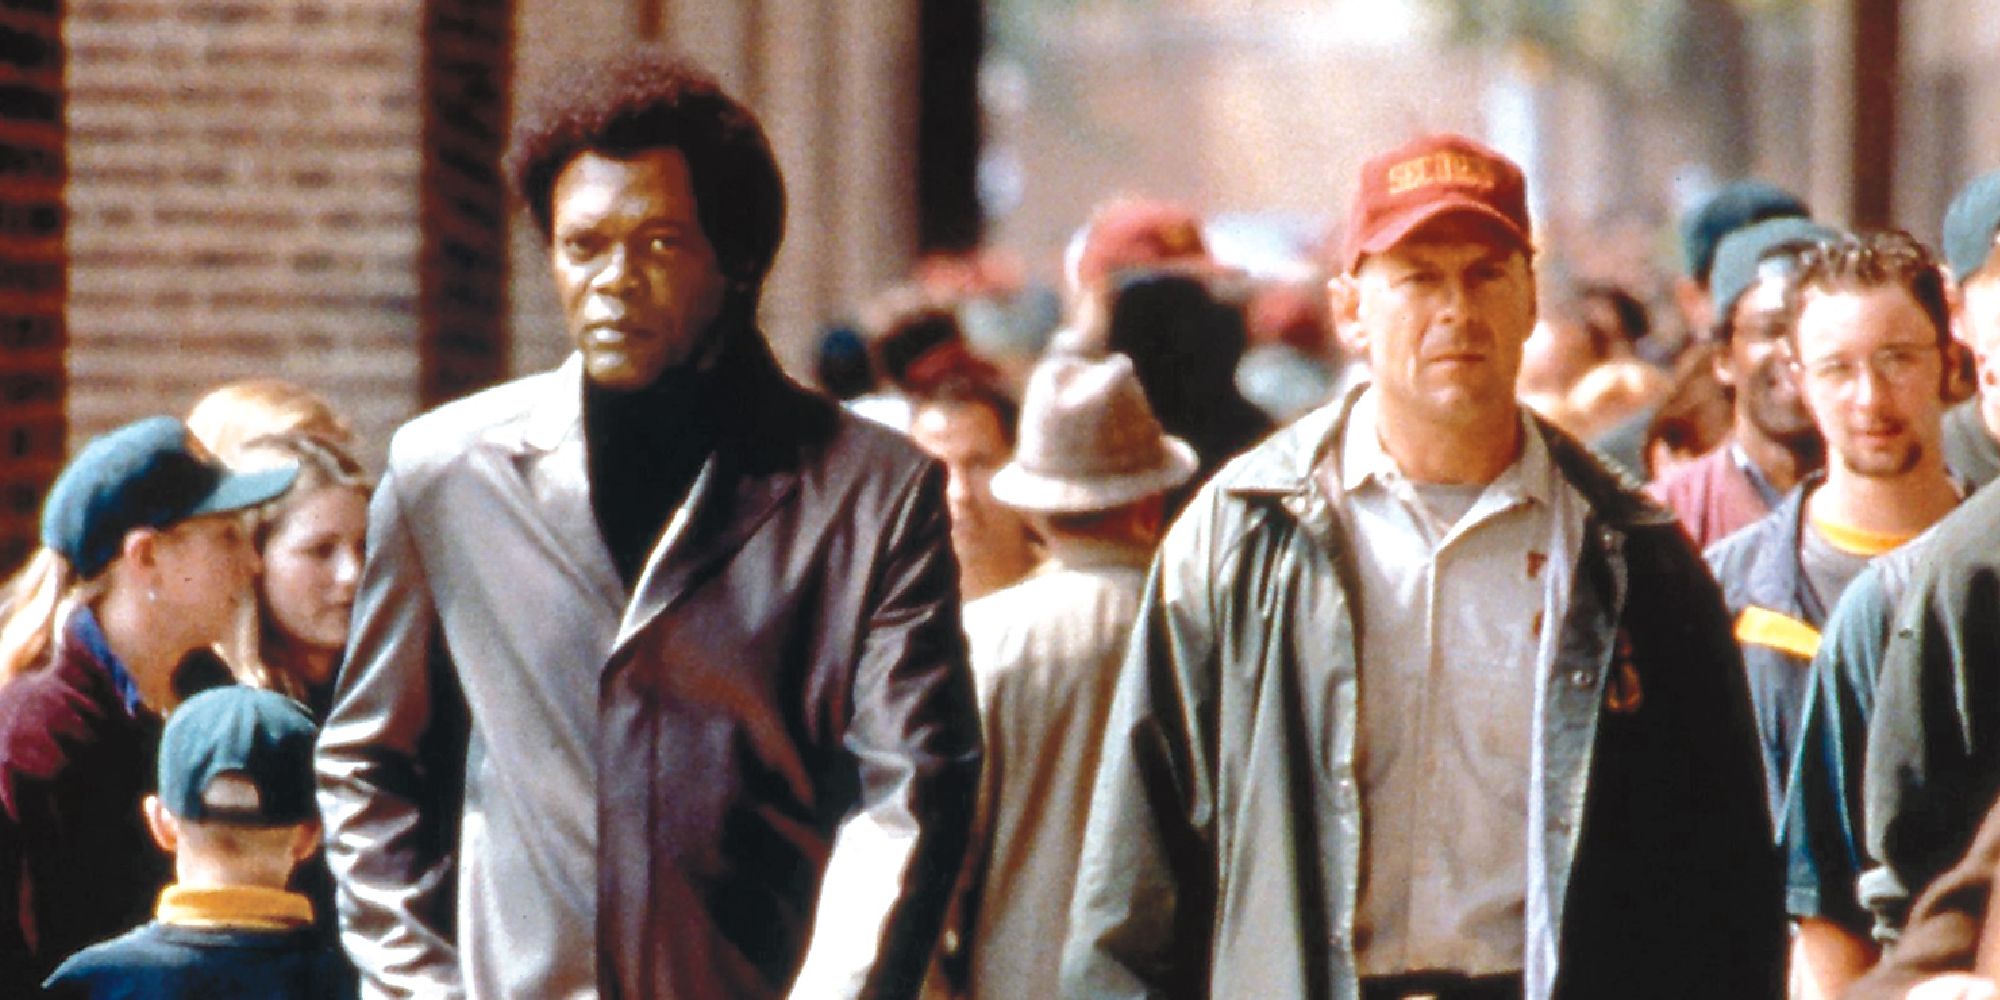 Bruce Willis and Samuel L. Jackson walking down a crowded street in Unbreakable